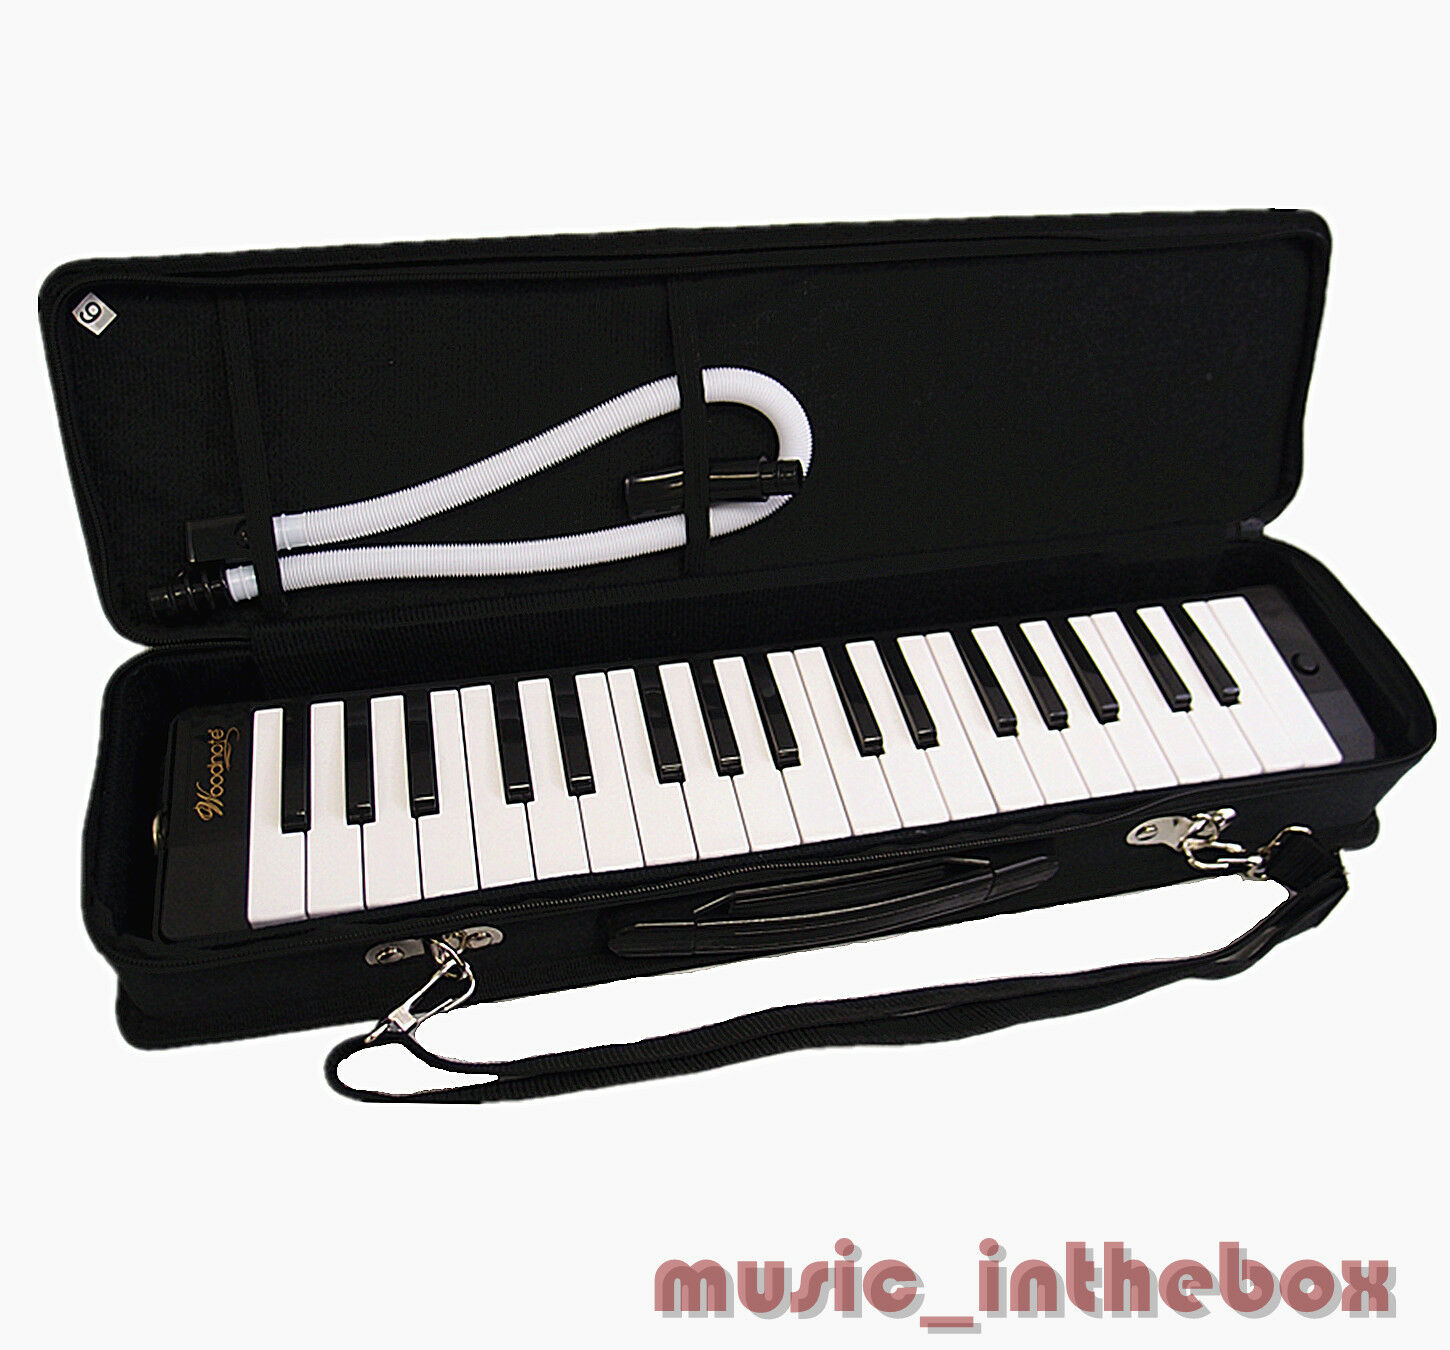 Woodnote Brand - Great 37 Key Black Melodica & Deluxe Carrying Case